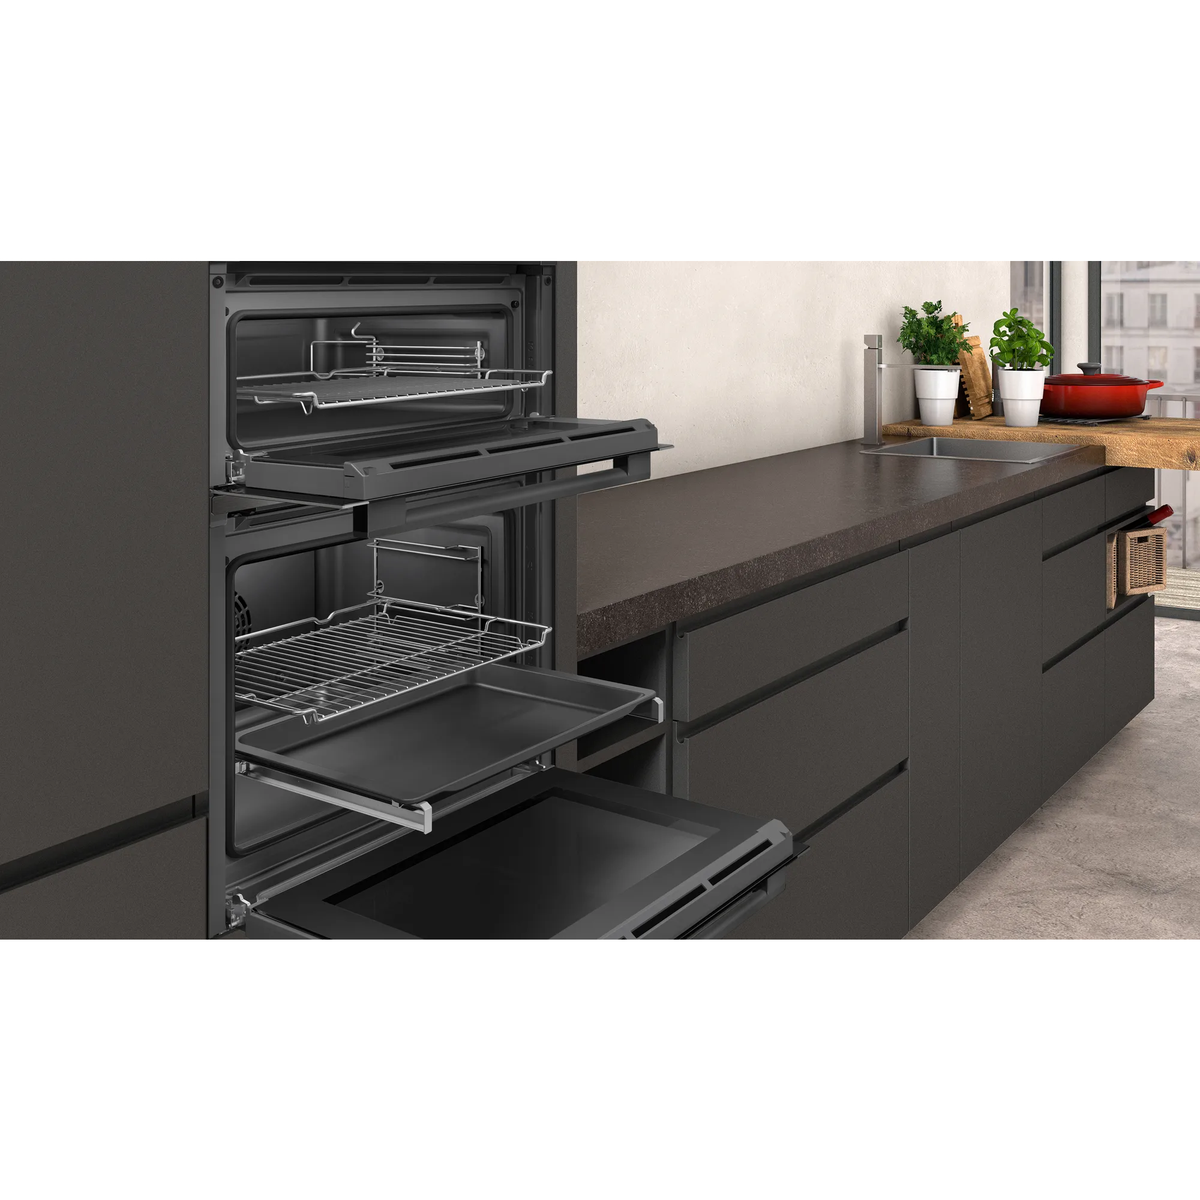 Neff N50 Built-In Electric Double Oven - Graphite Grey | U1ACE2HG0B (7594997285052)